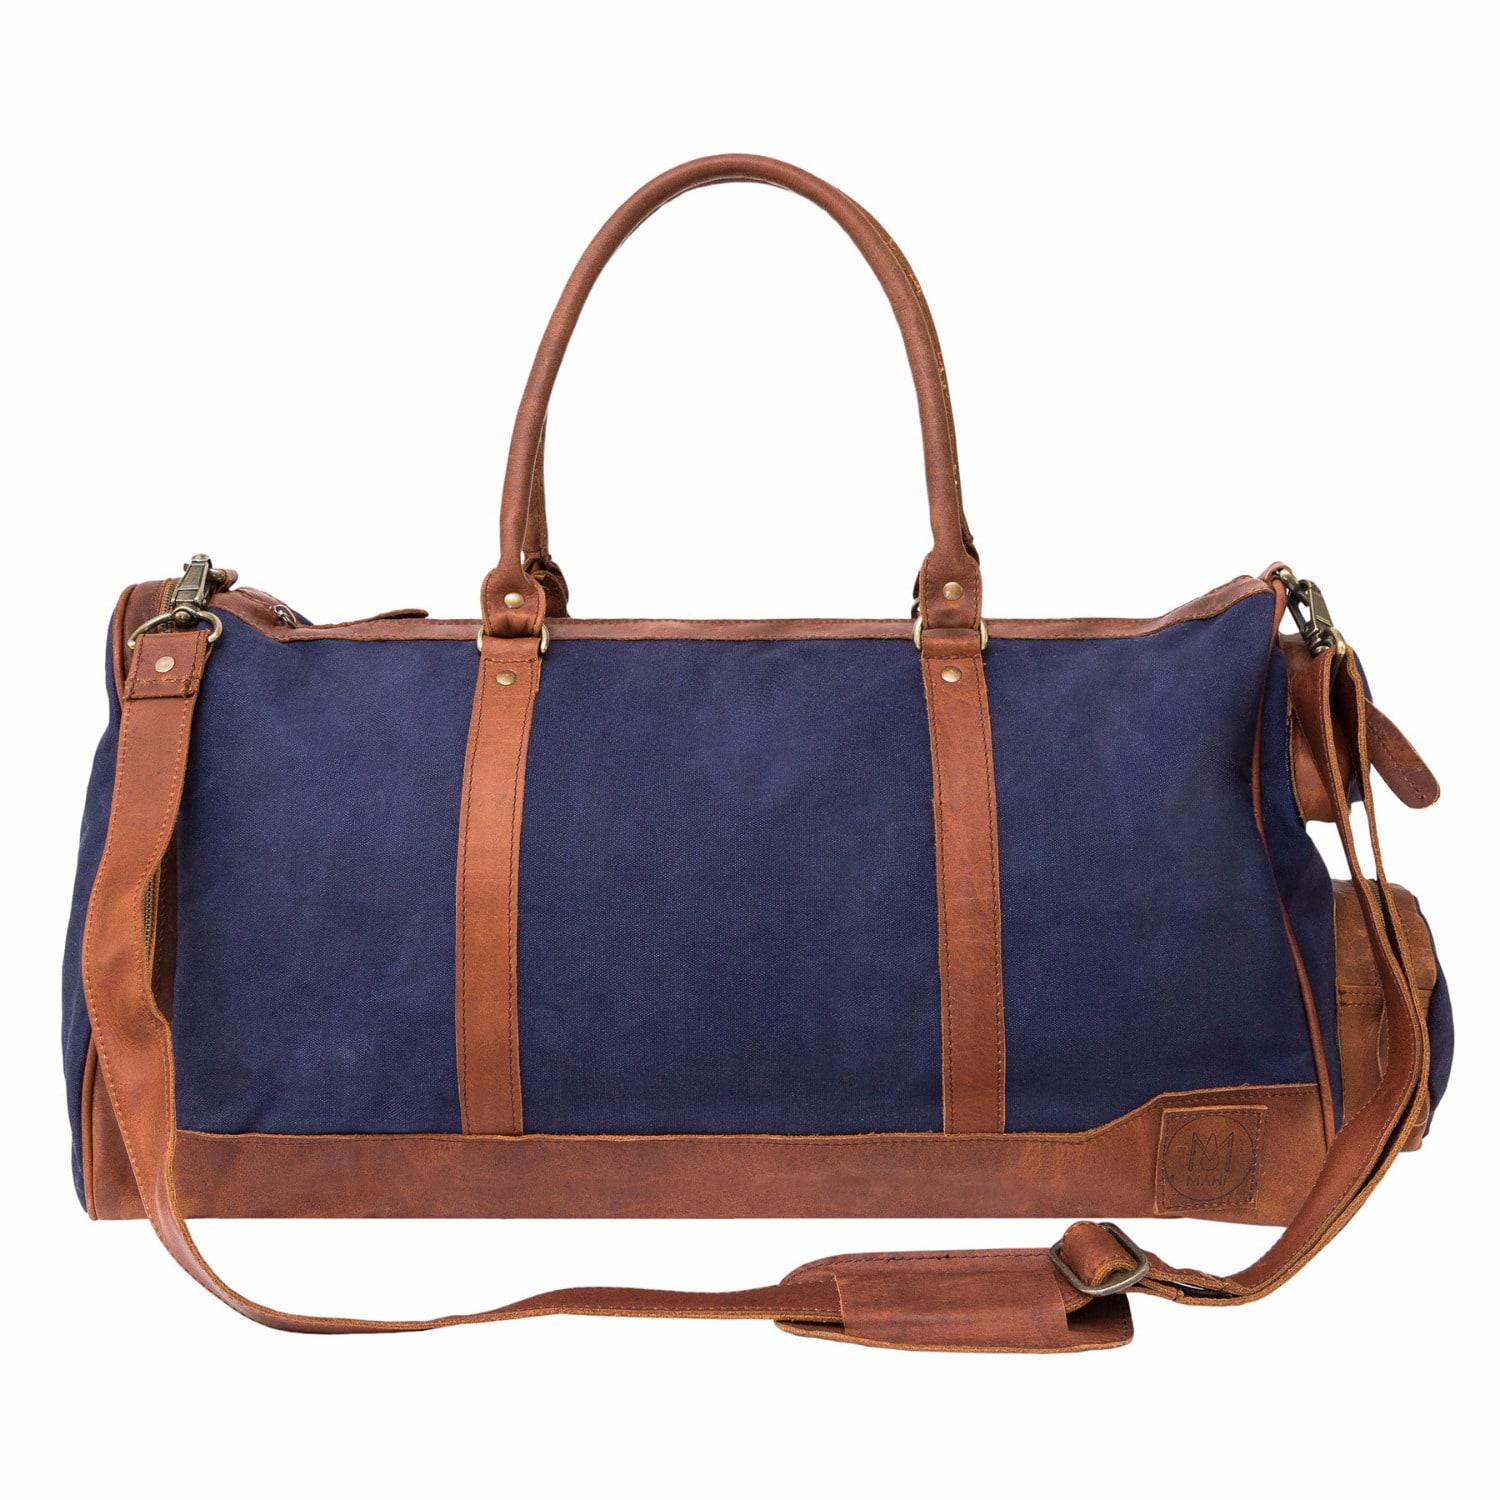 Lyst - Mahi Leather Canvas Leather Columbus Holdall/duffle Weekend/overnight Bag In Navy Blue in ...